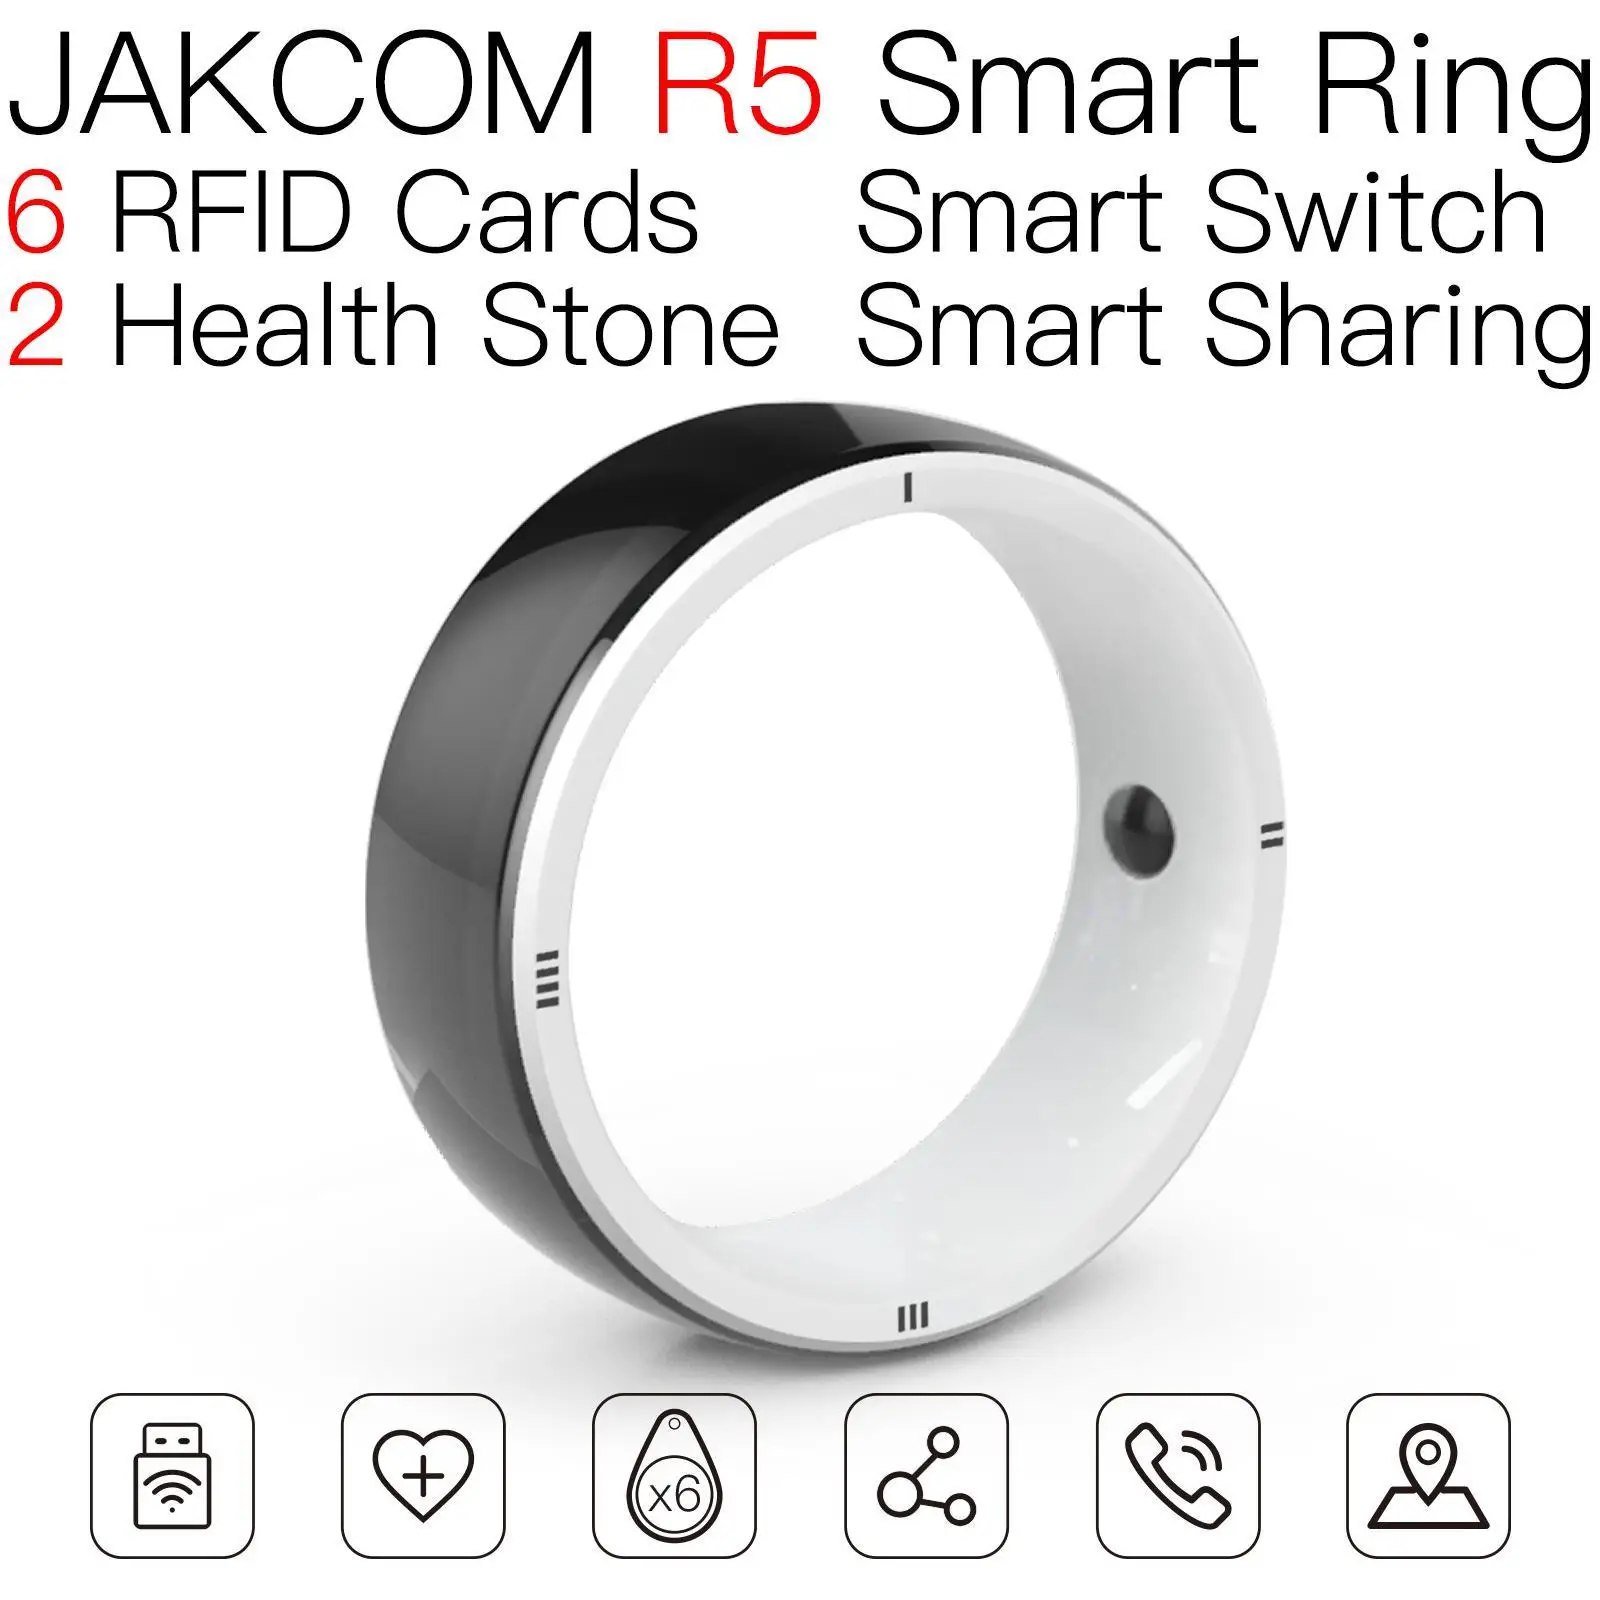 

JAKCOM R5 Smart Ring Best gift with hf uhf nfc classic 1k s50 and h3 rfid tag 125khz rewritable chageable anleon s2 microchip